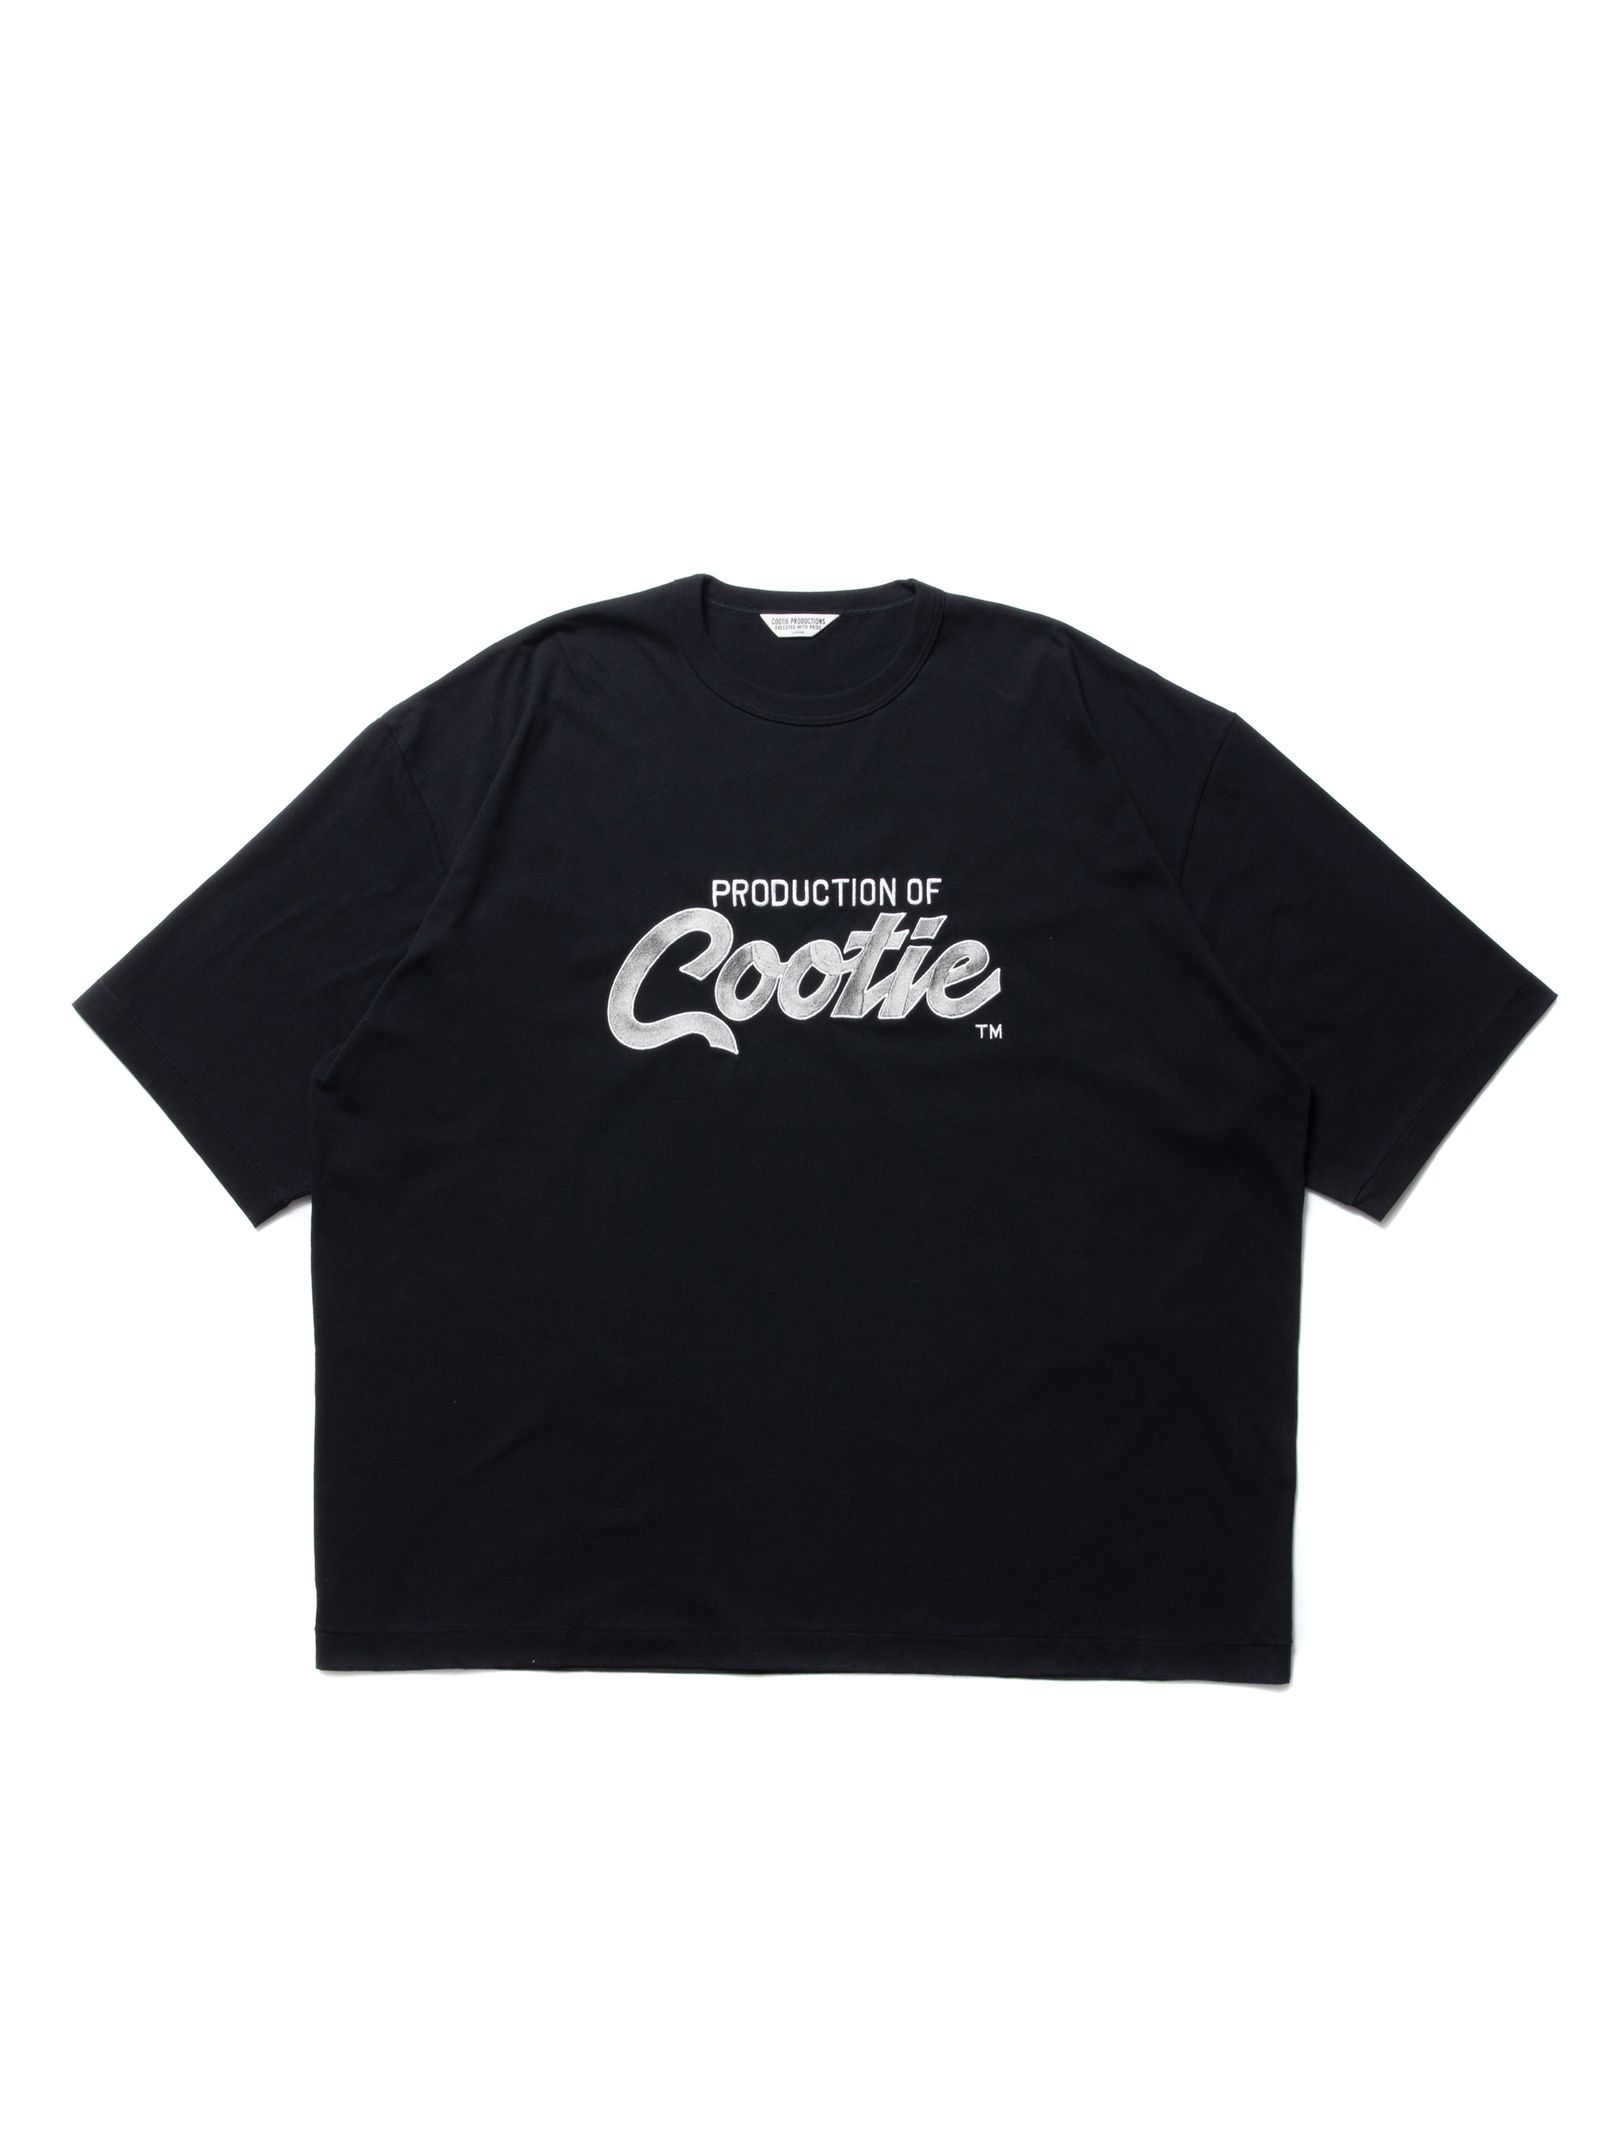 Tシャツ・シャツ・パーカー | COOTIE PRODUCTIONS - クーティー 正規 